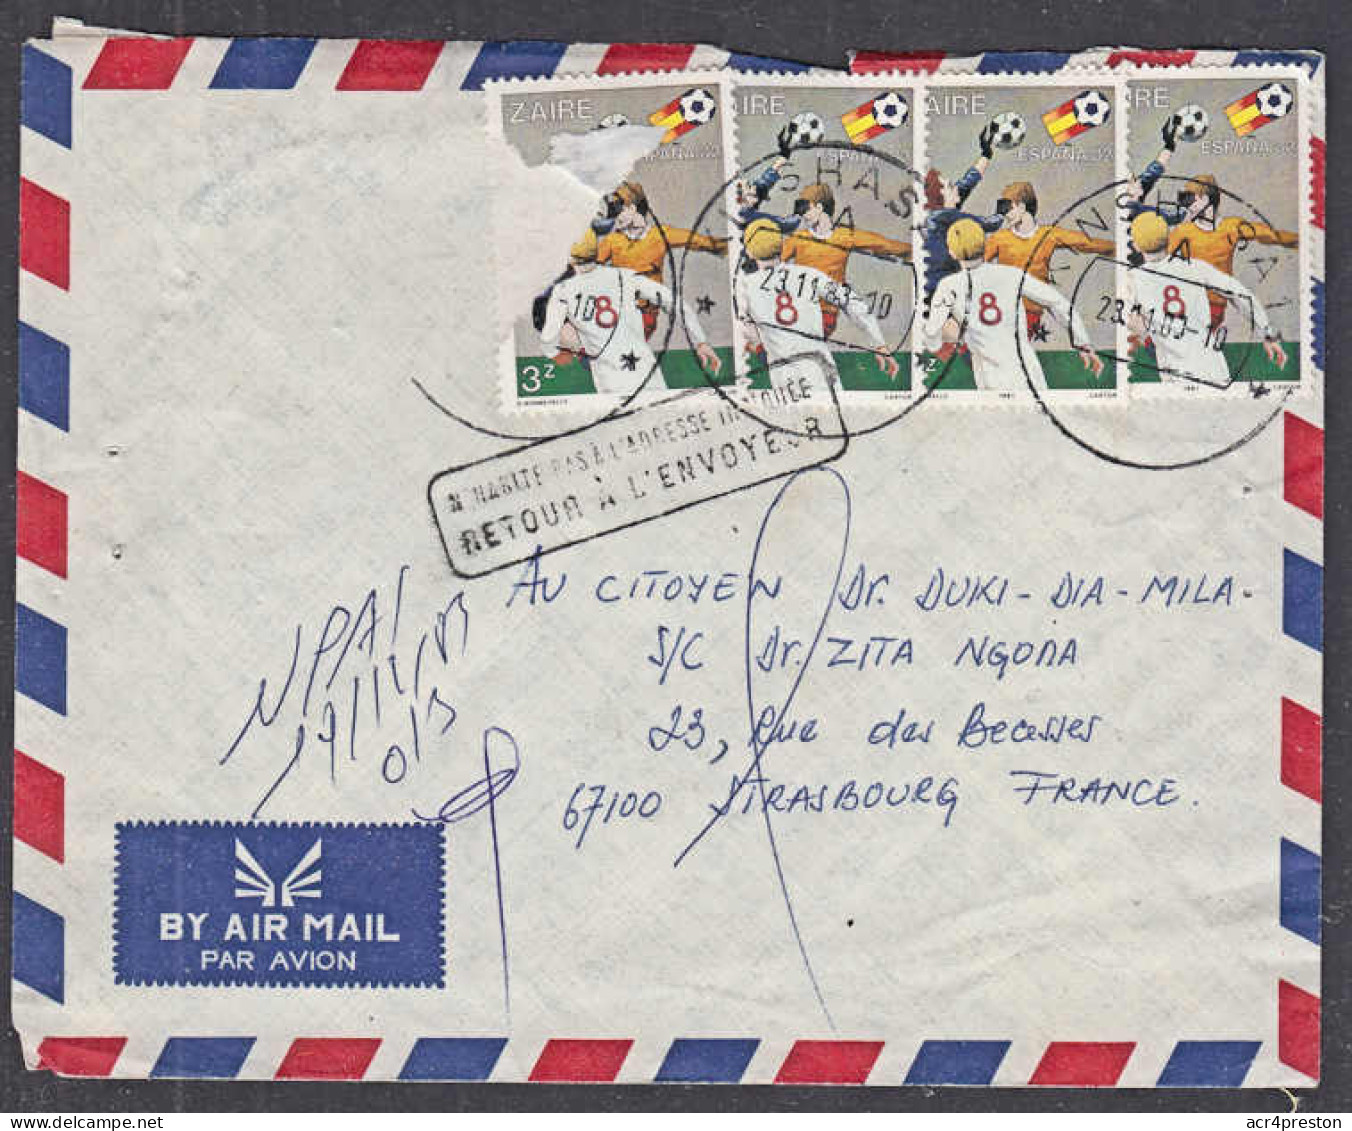 Ca0491 ZAIRE 1983, Football Stamps On Kinshasa Cover To France, 'Retour A L'Envoyeur' - Covers & Documents